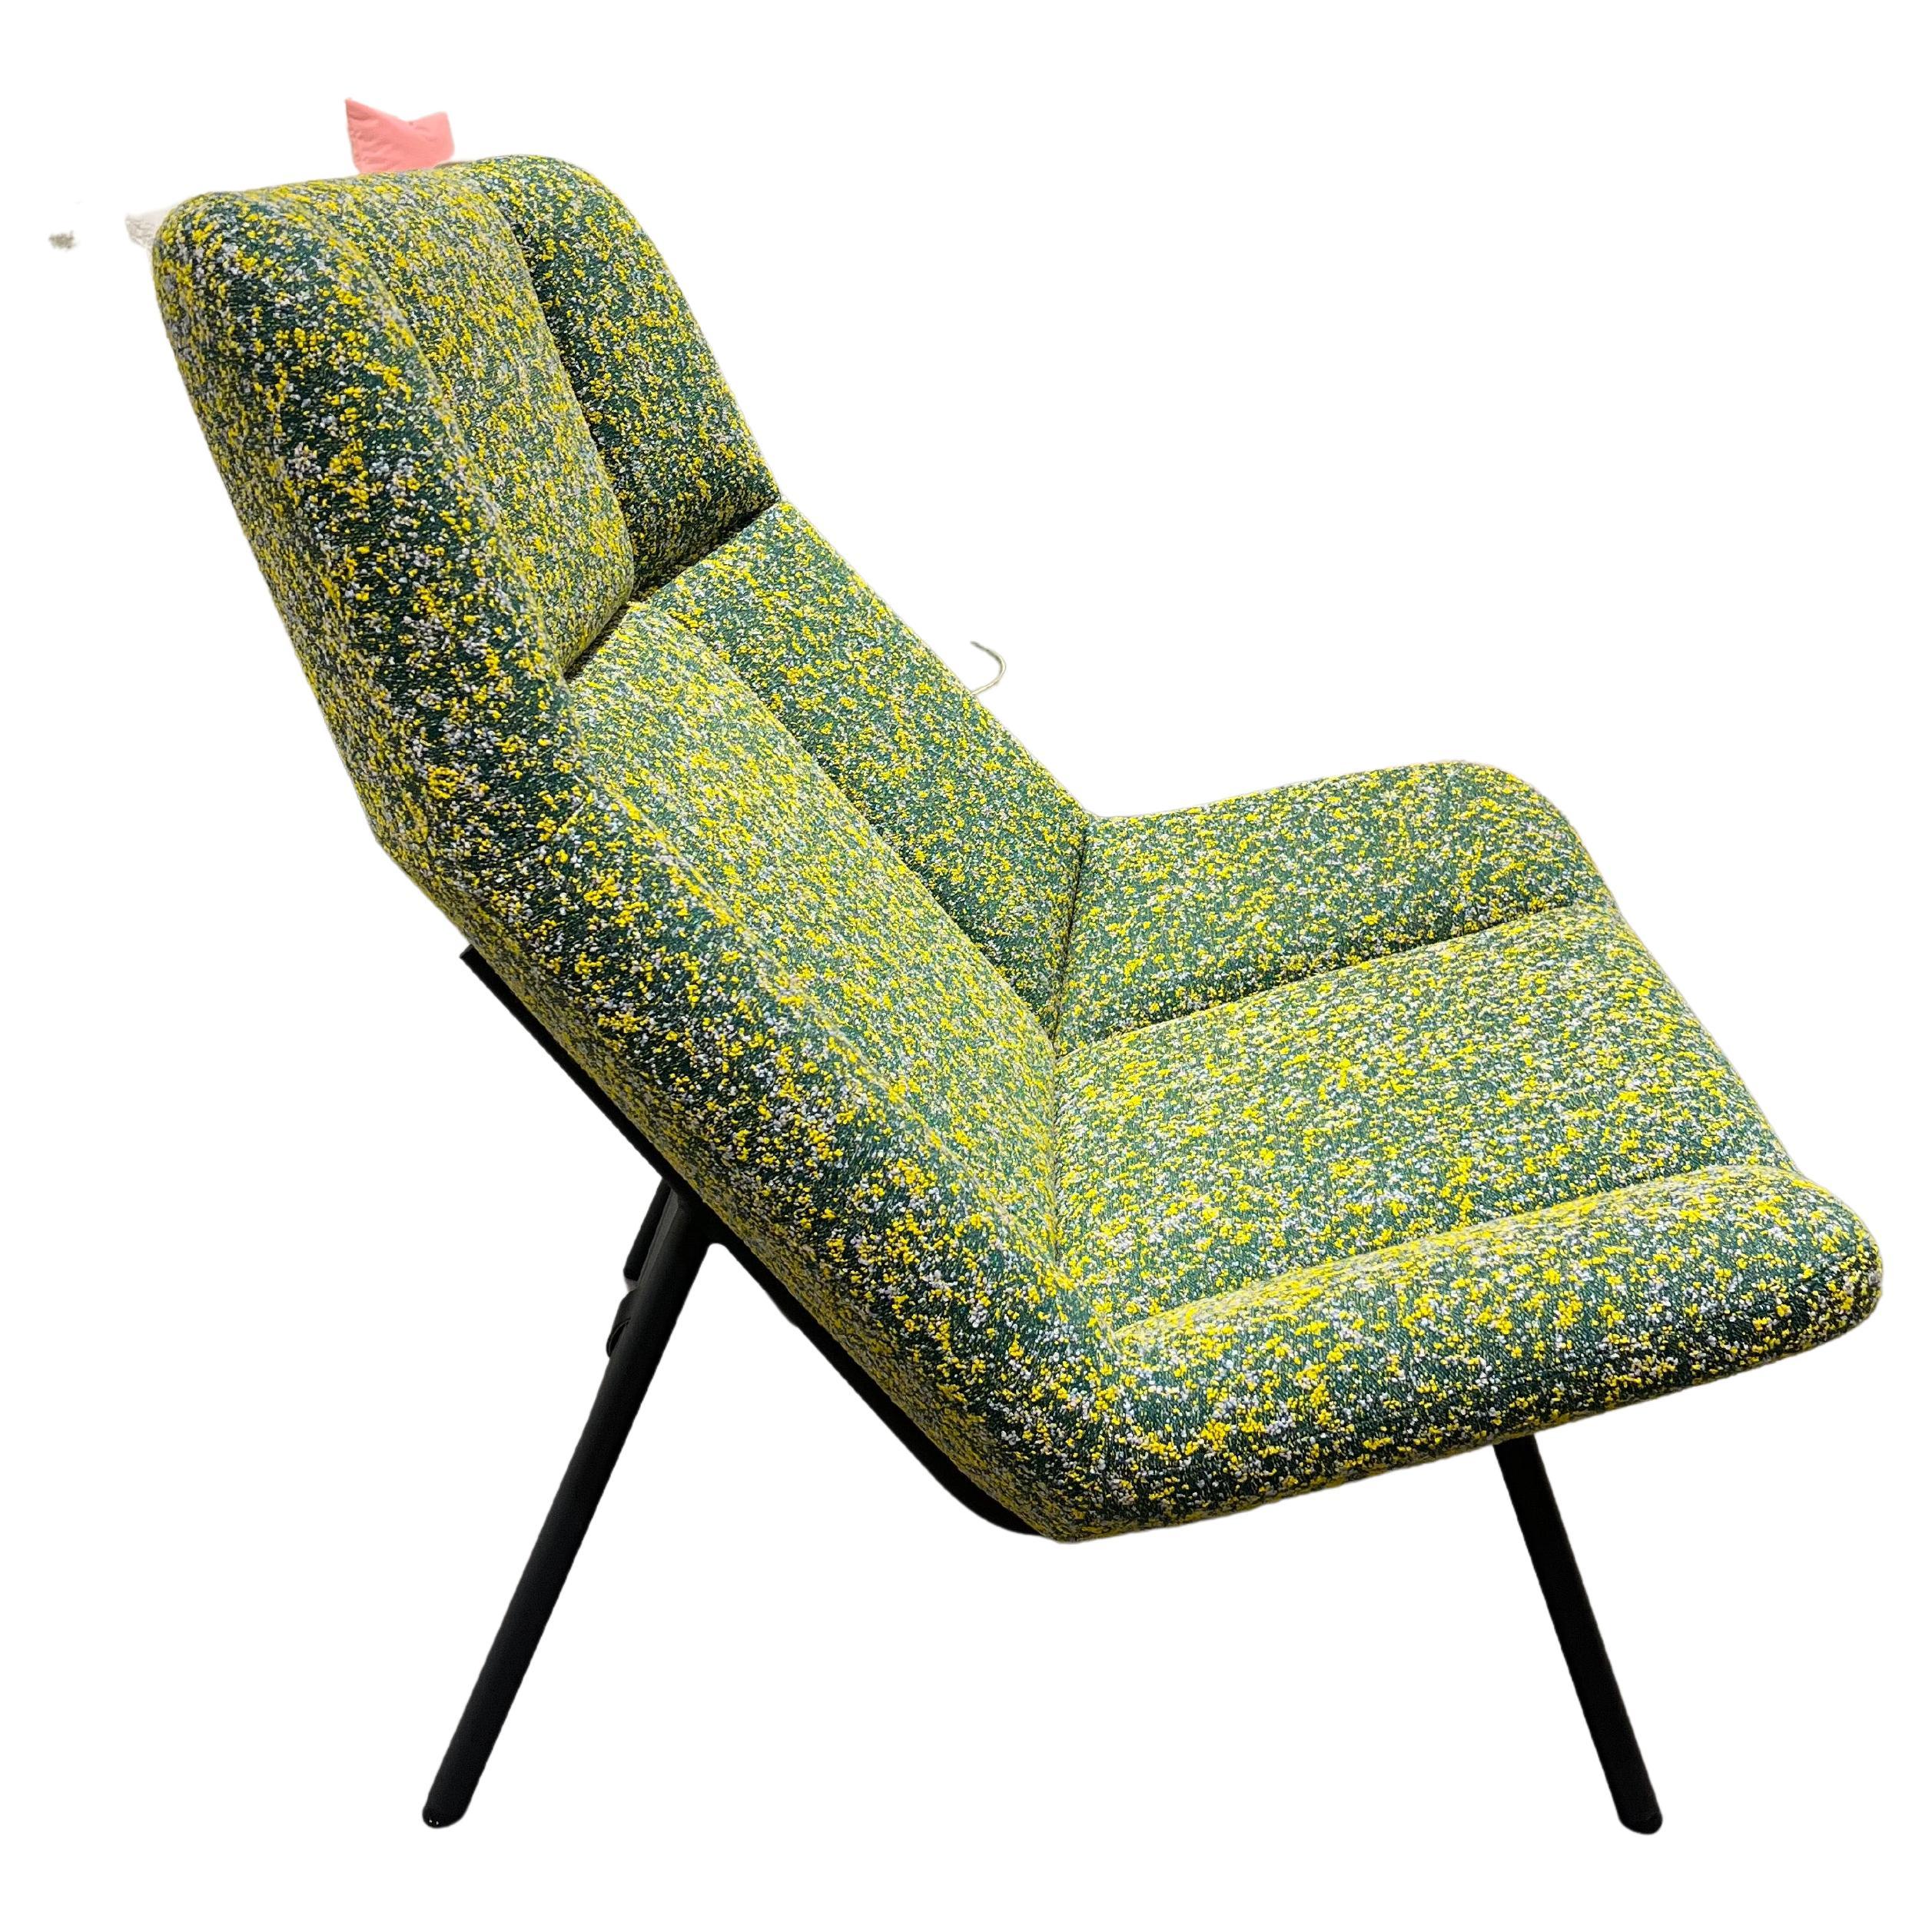 Soft Facet lounge chair
Frame: Matt black P10
fabric: Atom #0964 Green

Design by Scholten & Baijings
Soft Facet is a comfortable, inviting lounge armchair with a distinctive richness of detail. Its open, welcoming form feels like a soft